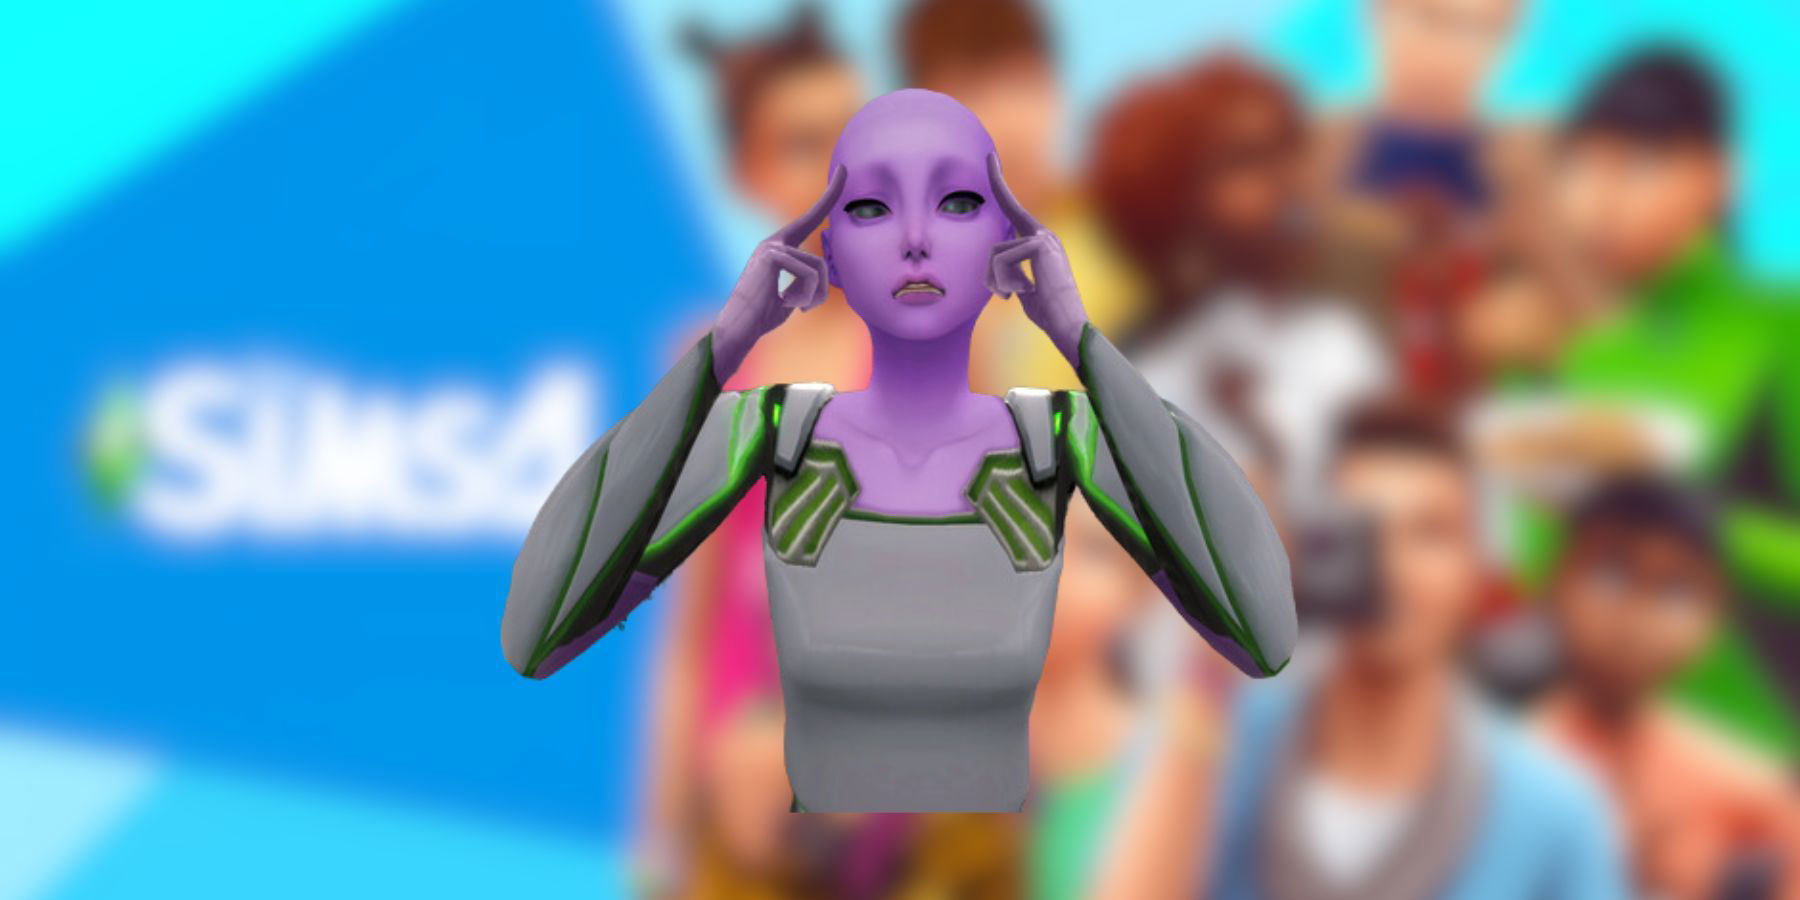 How To Find Aliens In Disguise In The Sims 4